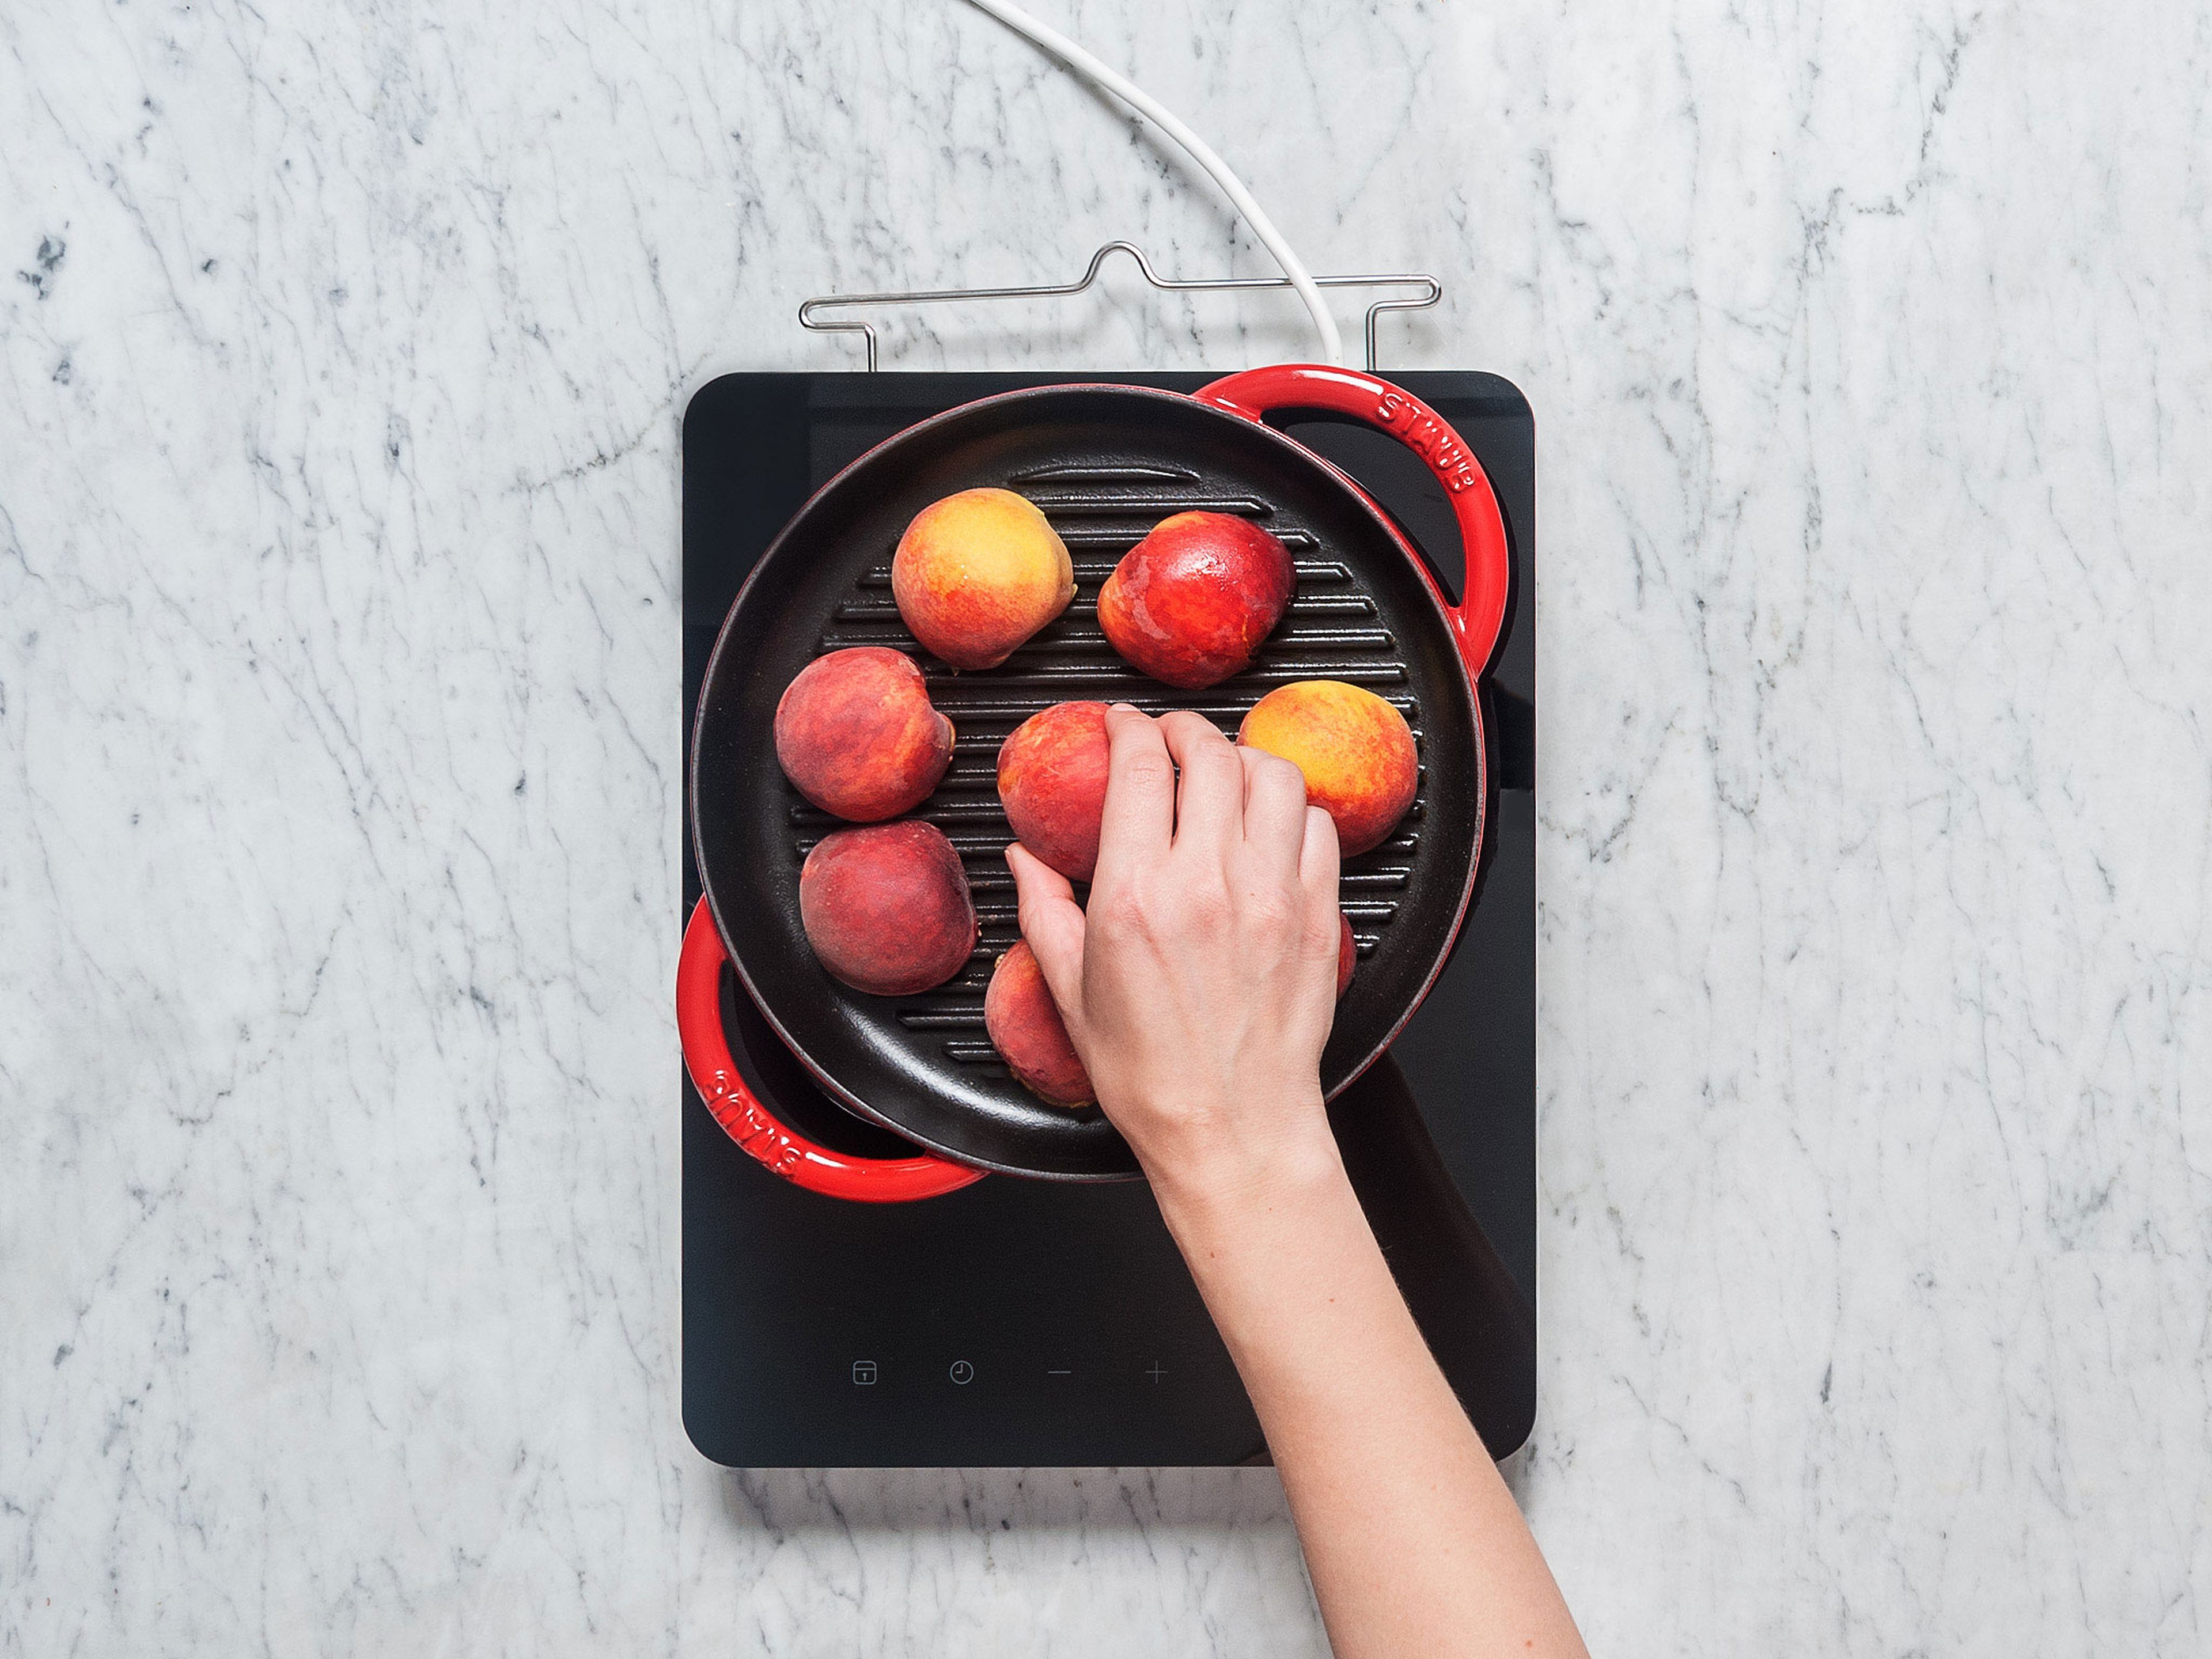 Heat the grill pan over high heat. Grease the pan with some oil if needed. Place the peaches cut side-down into the pan and grill for approx. 3 – 5 min, or until grill marks have formed.